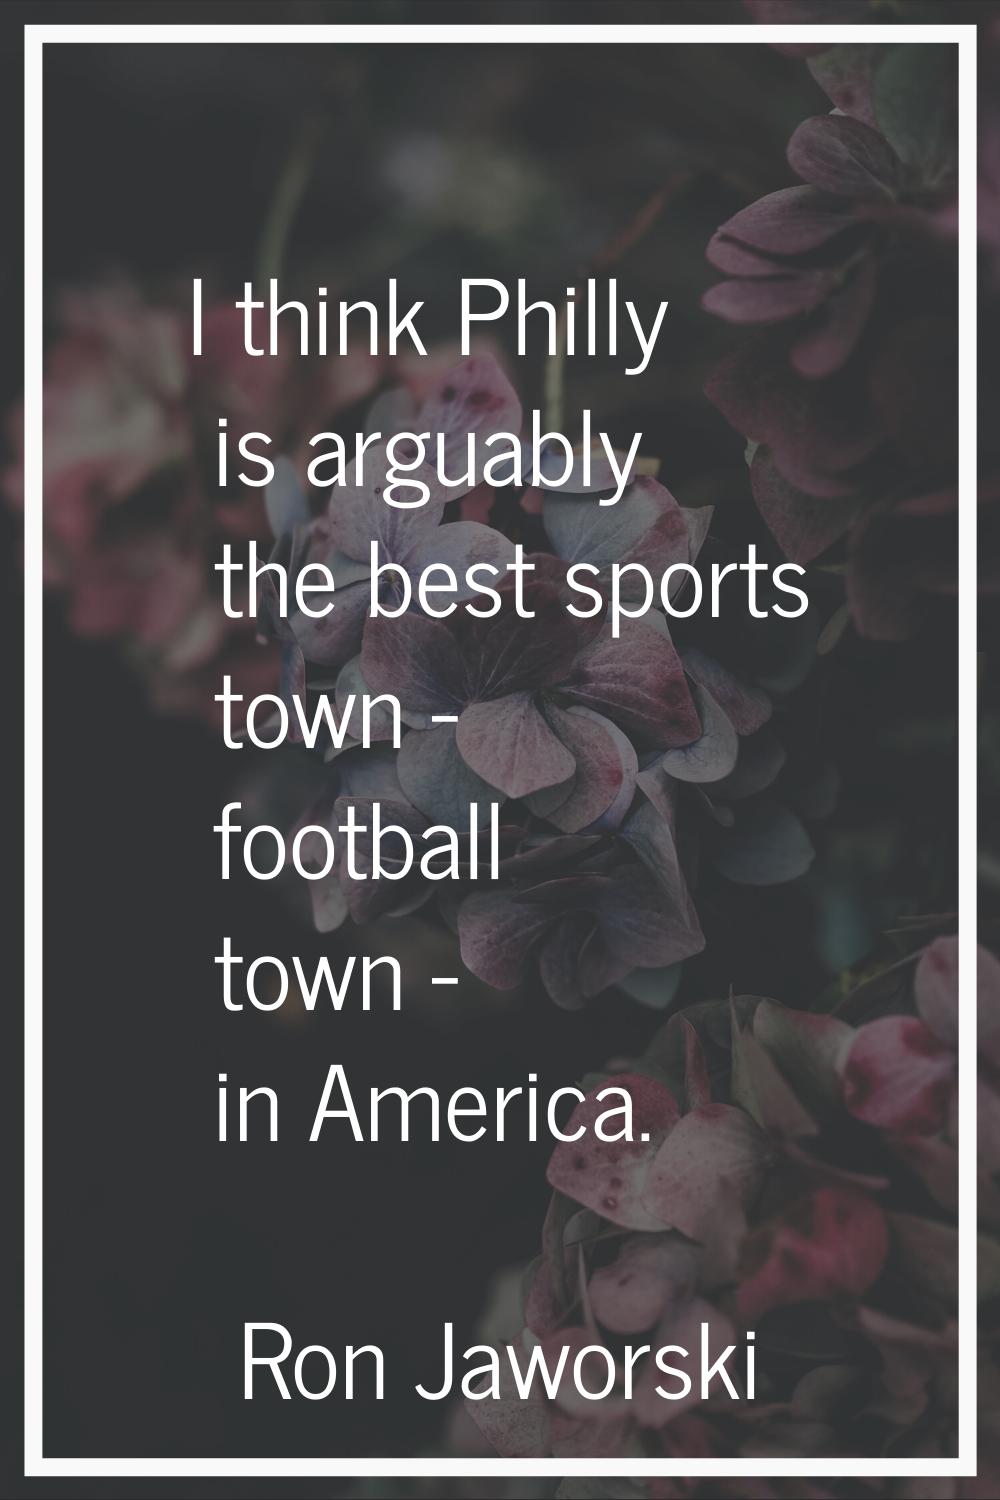 I think Philly is arguably the best sports town - football town - in America.